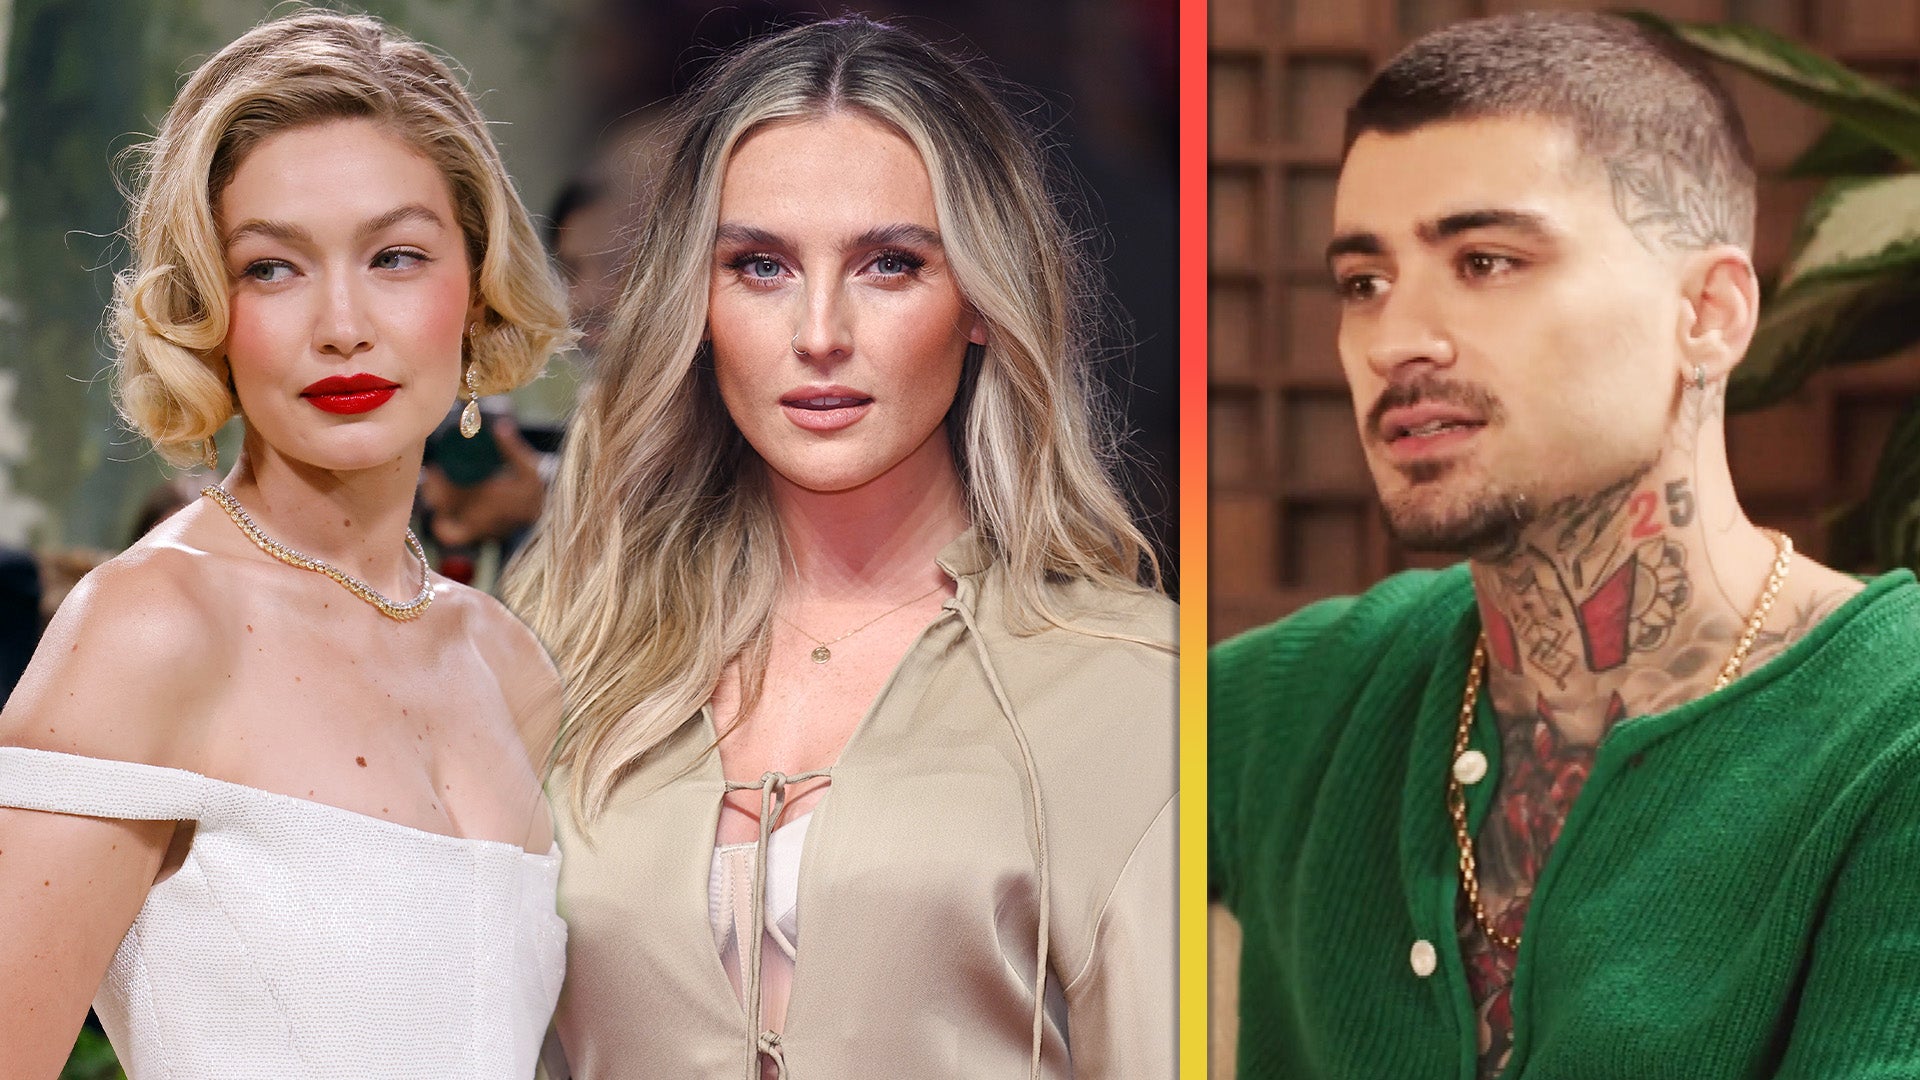 Zayn Malik Says He's Never Been in Love Despite Gigi Hadid and Perrie Edwards Romances